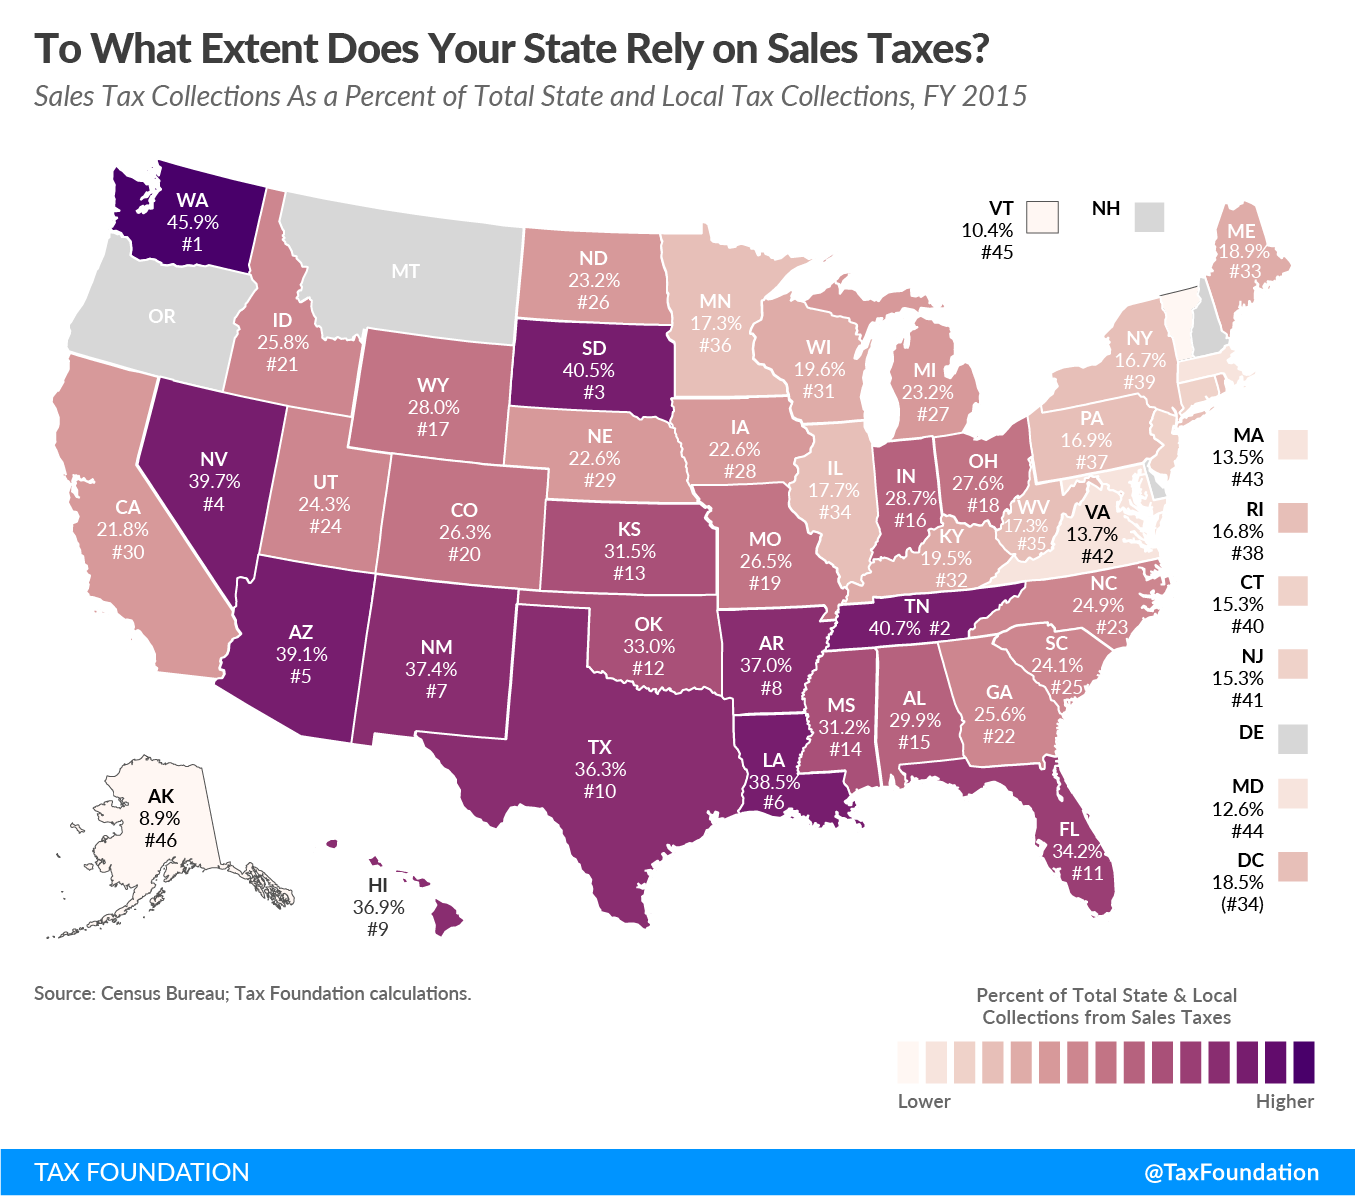 To What Extent Does Your State Rely on Sales Taxes?